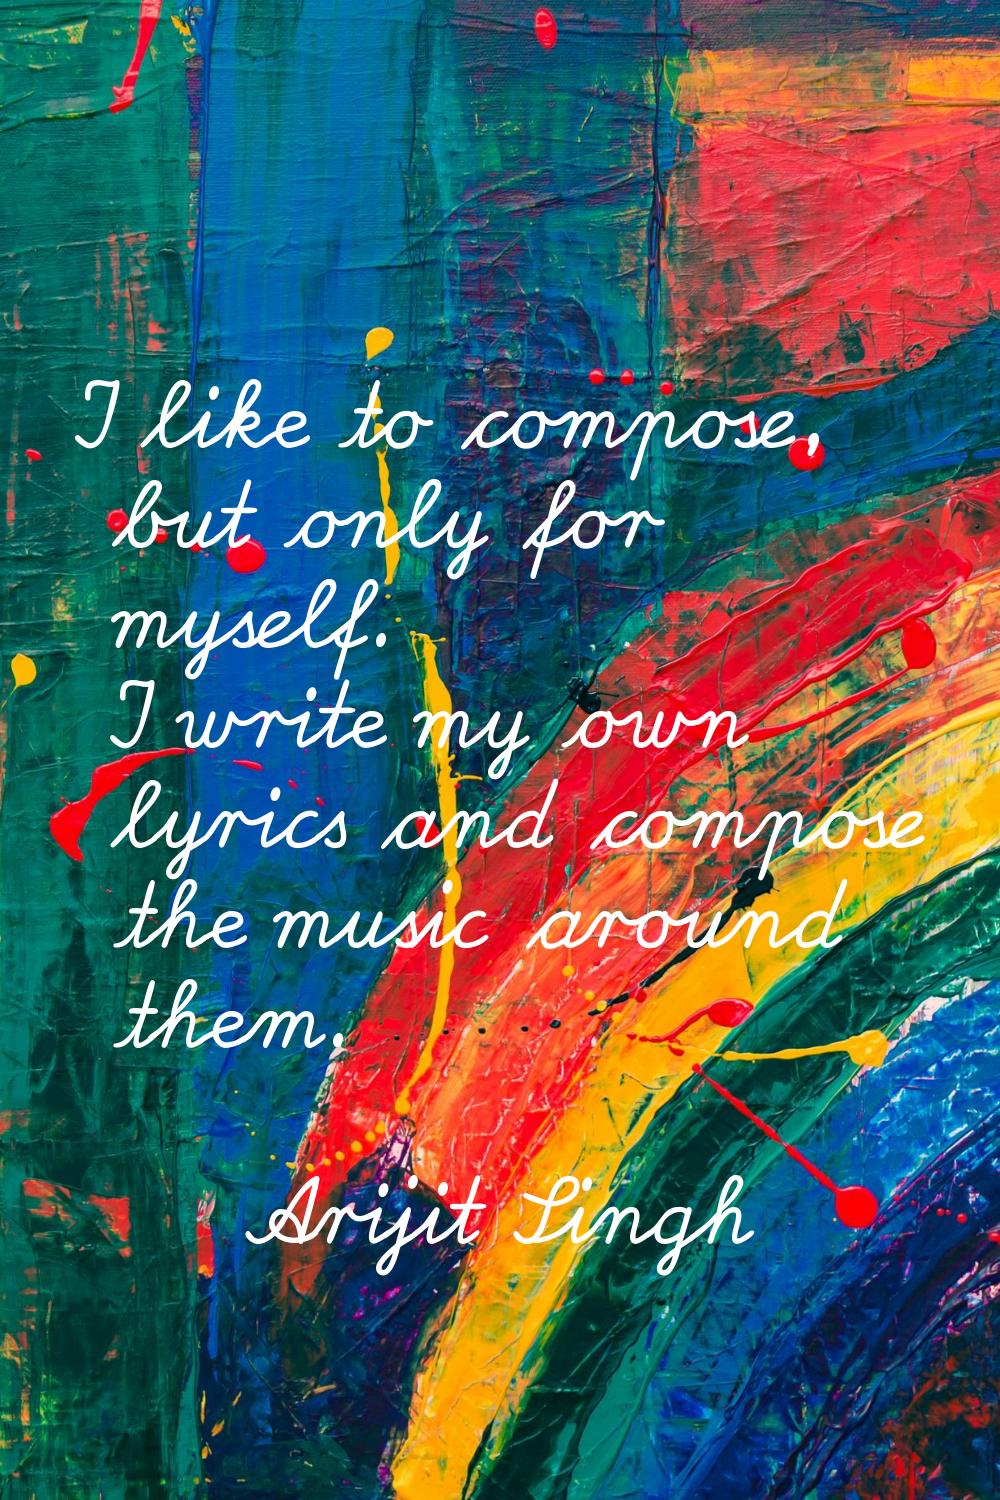 I like to compose, but only for myself. I write my own lyrics and compose the music around them.